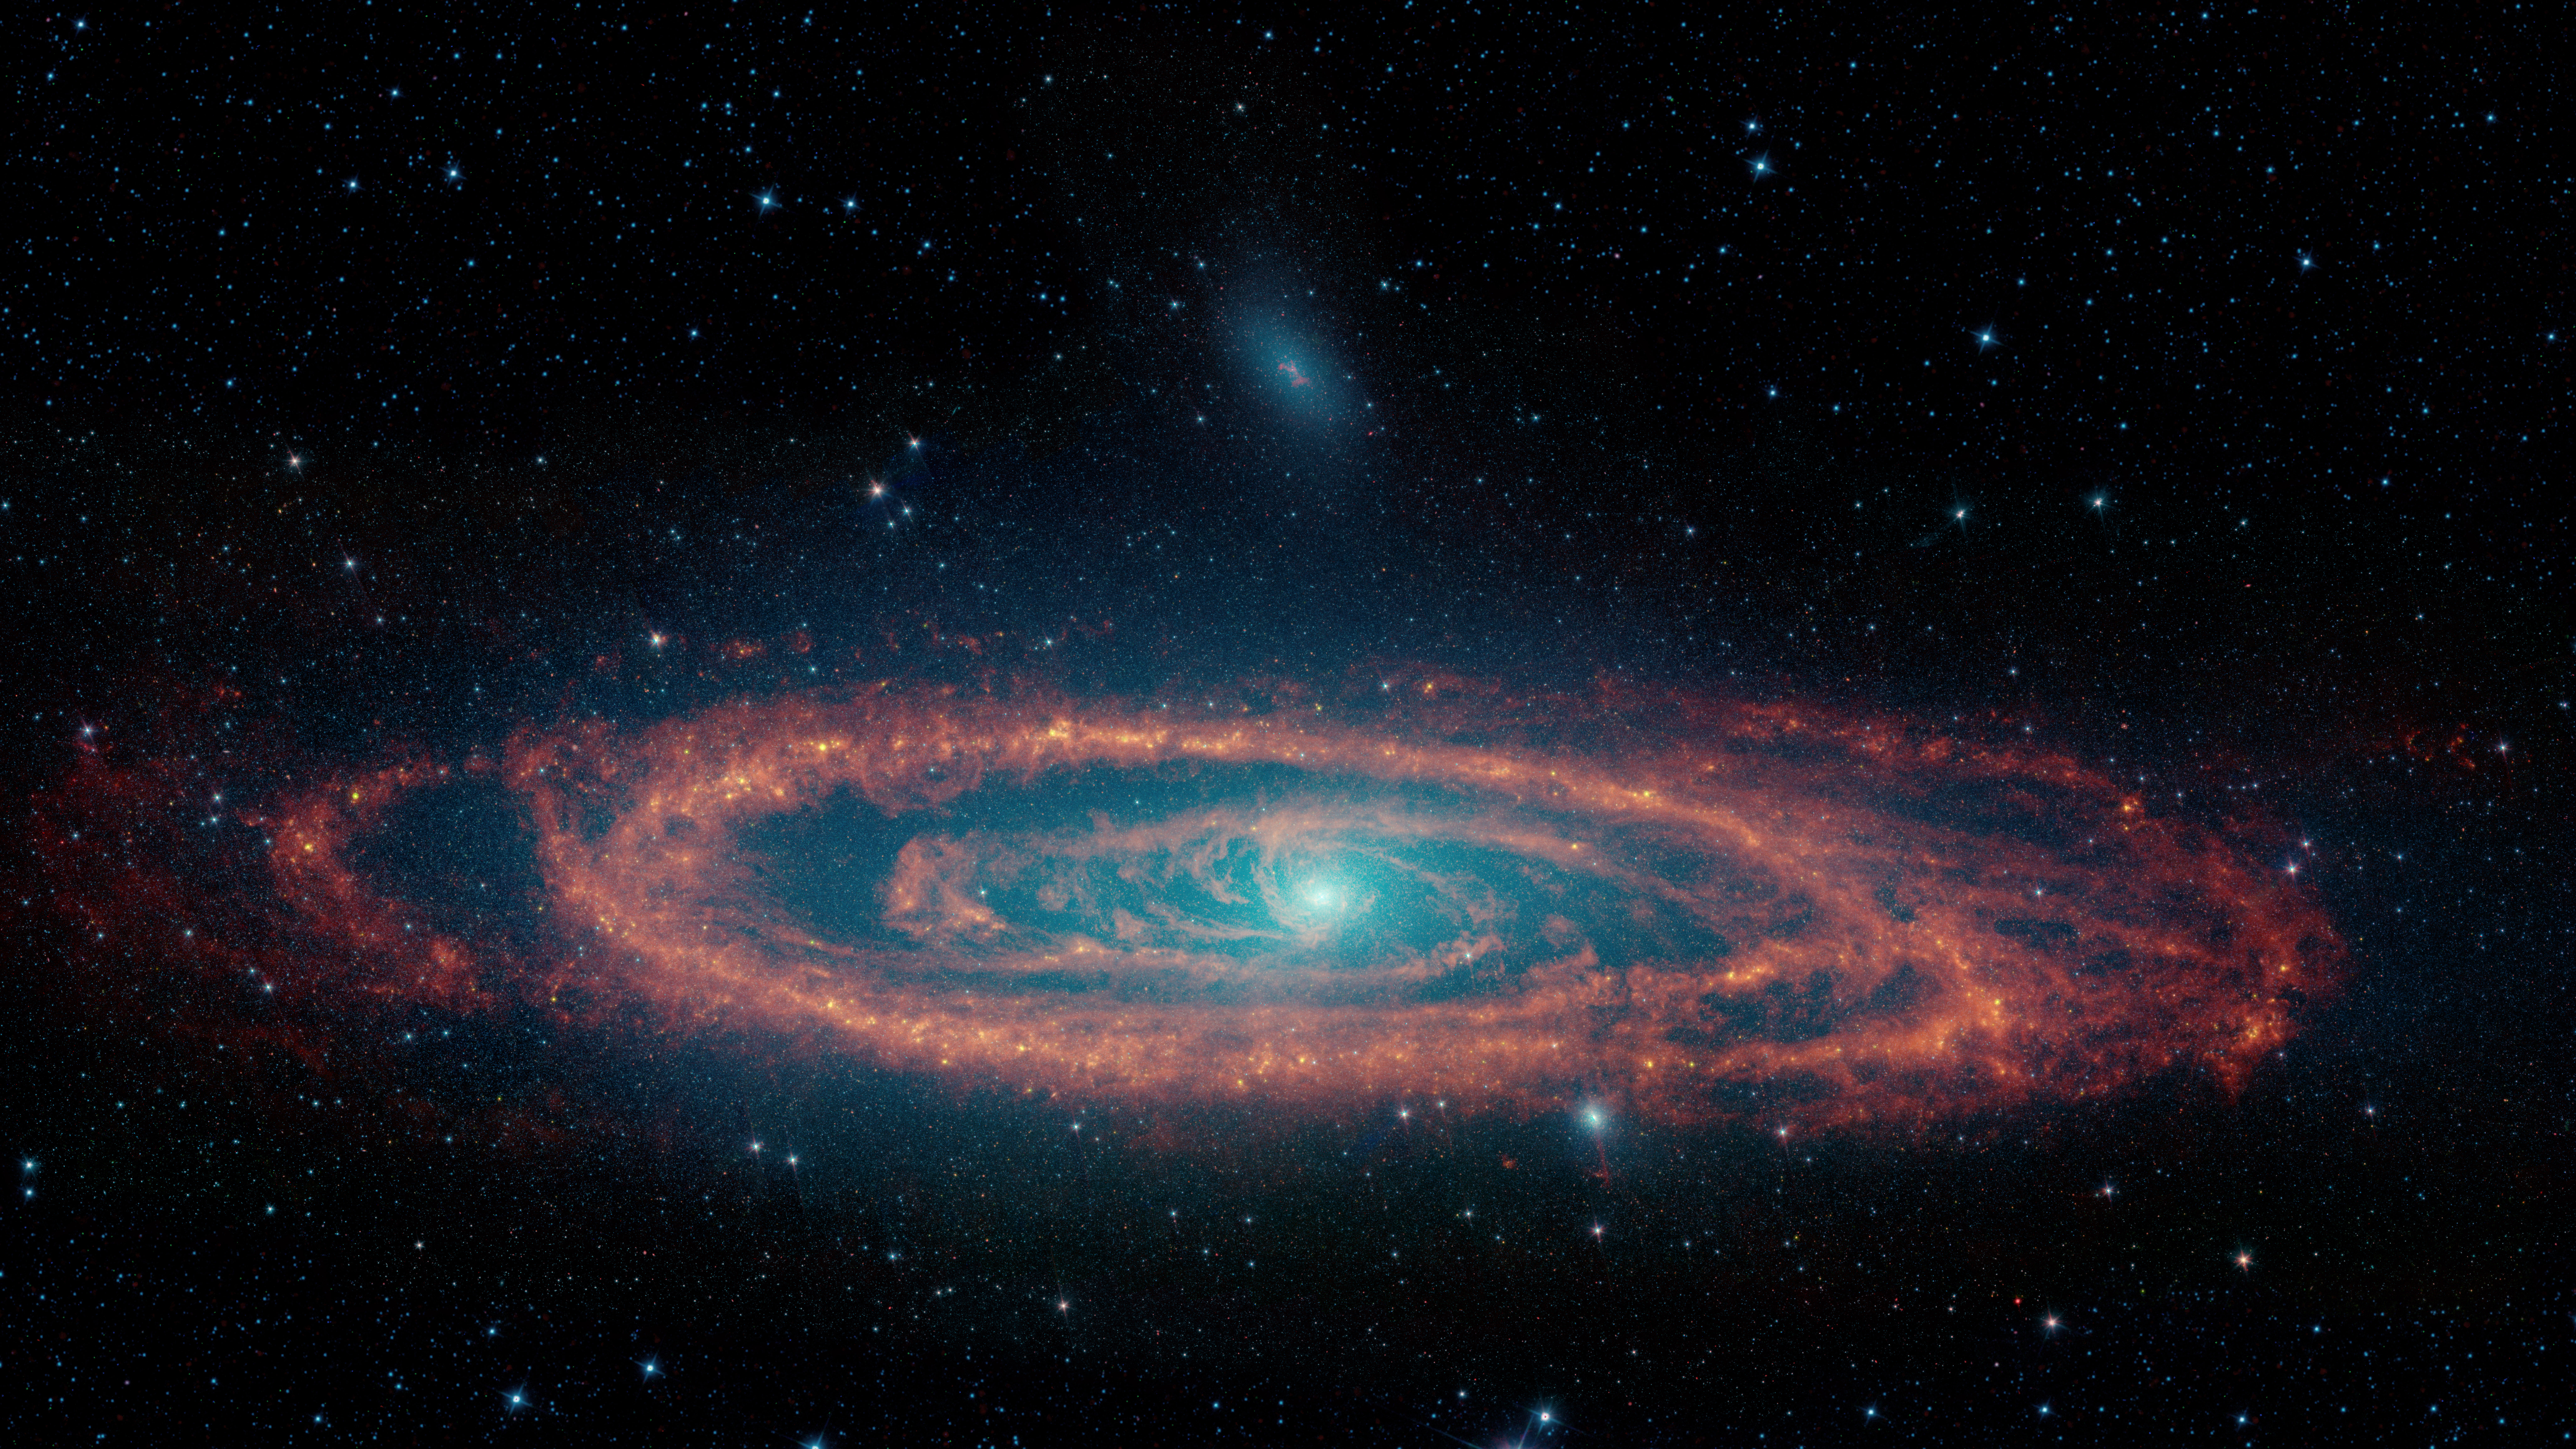 These images of the Andromeda galaxy use data from NASA’s retired Spitzer Space Telescope. Multiple wavelengths are shown in the image on the left, revealing stars, dust, and areas of star formation. The image on the right shows dust only, making it easier to see the galaxy’s underlying structure.